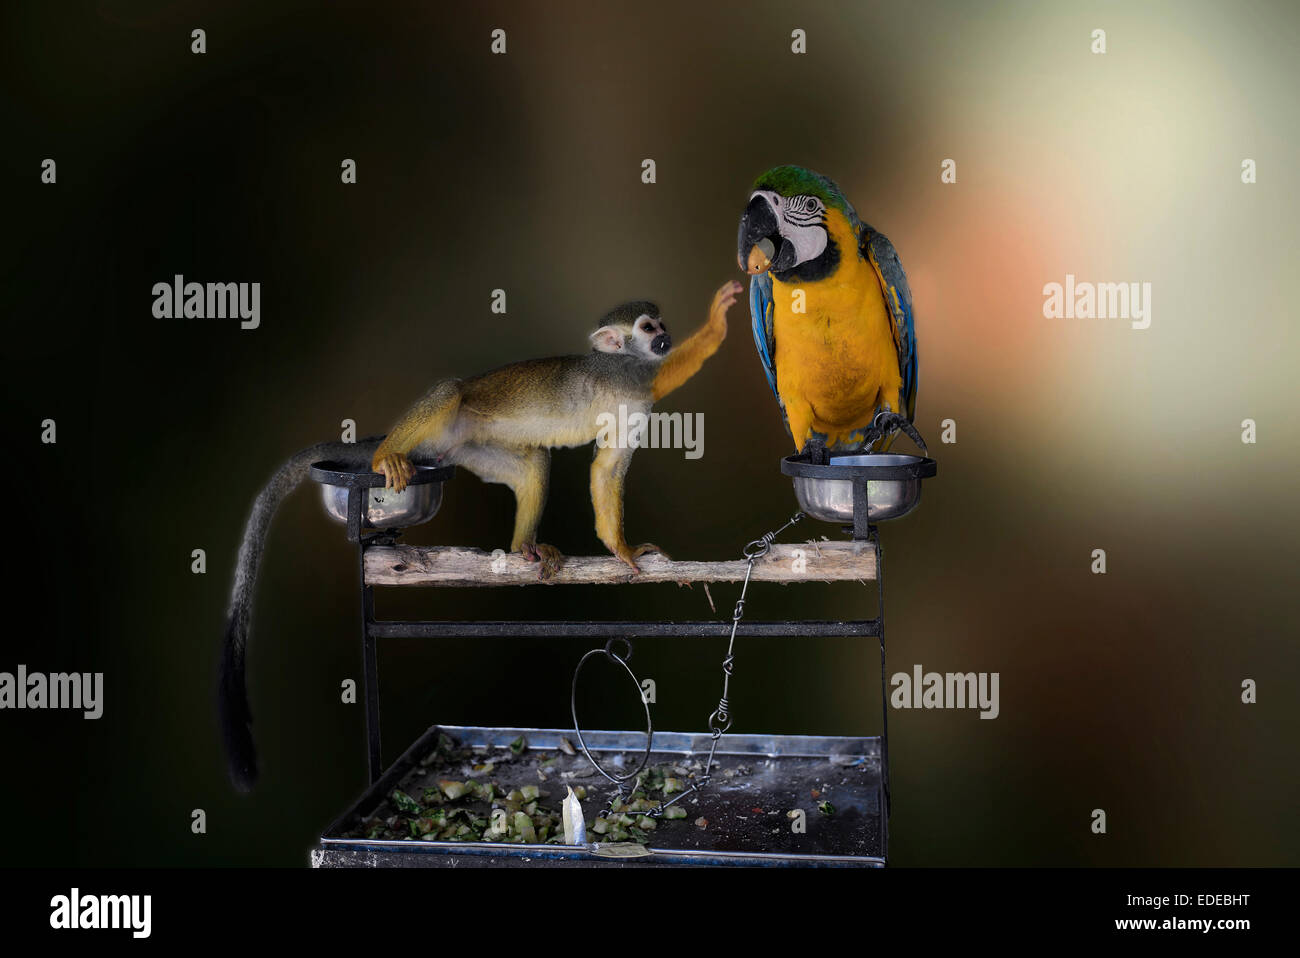 Mischievous animal. Monkey stealing food from a startled Macaw. Funny animals. A set of three sequences Stock Photo